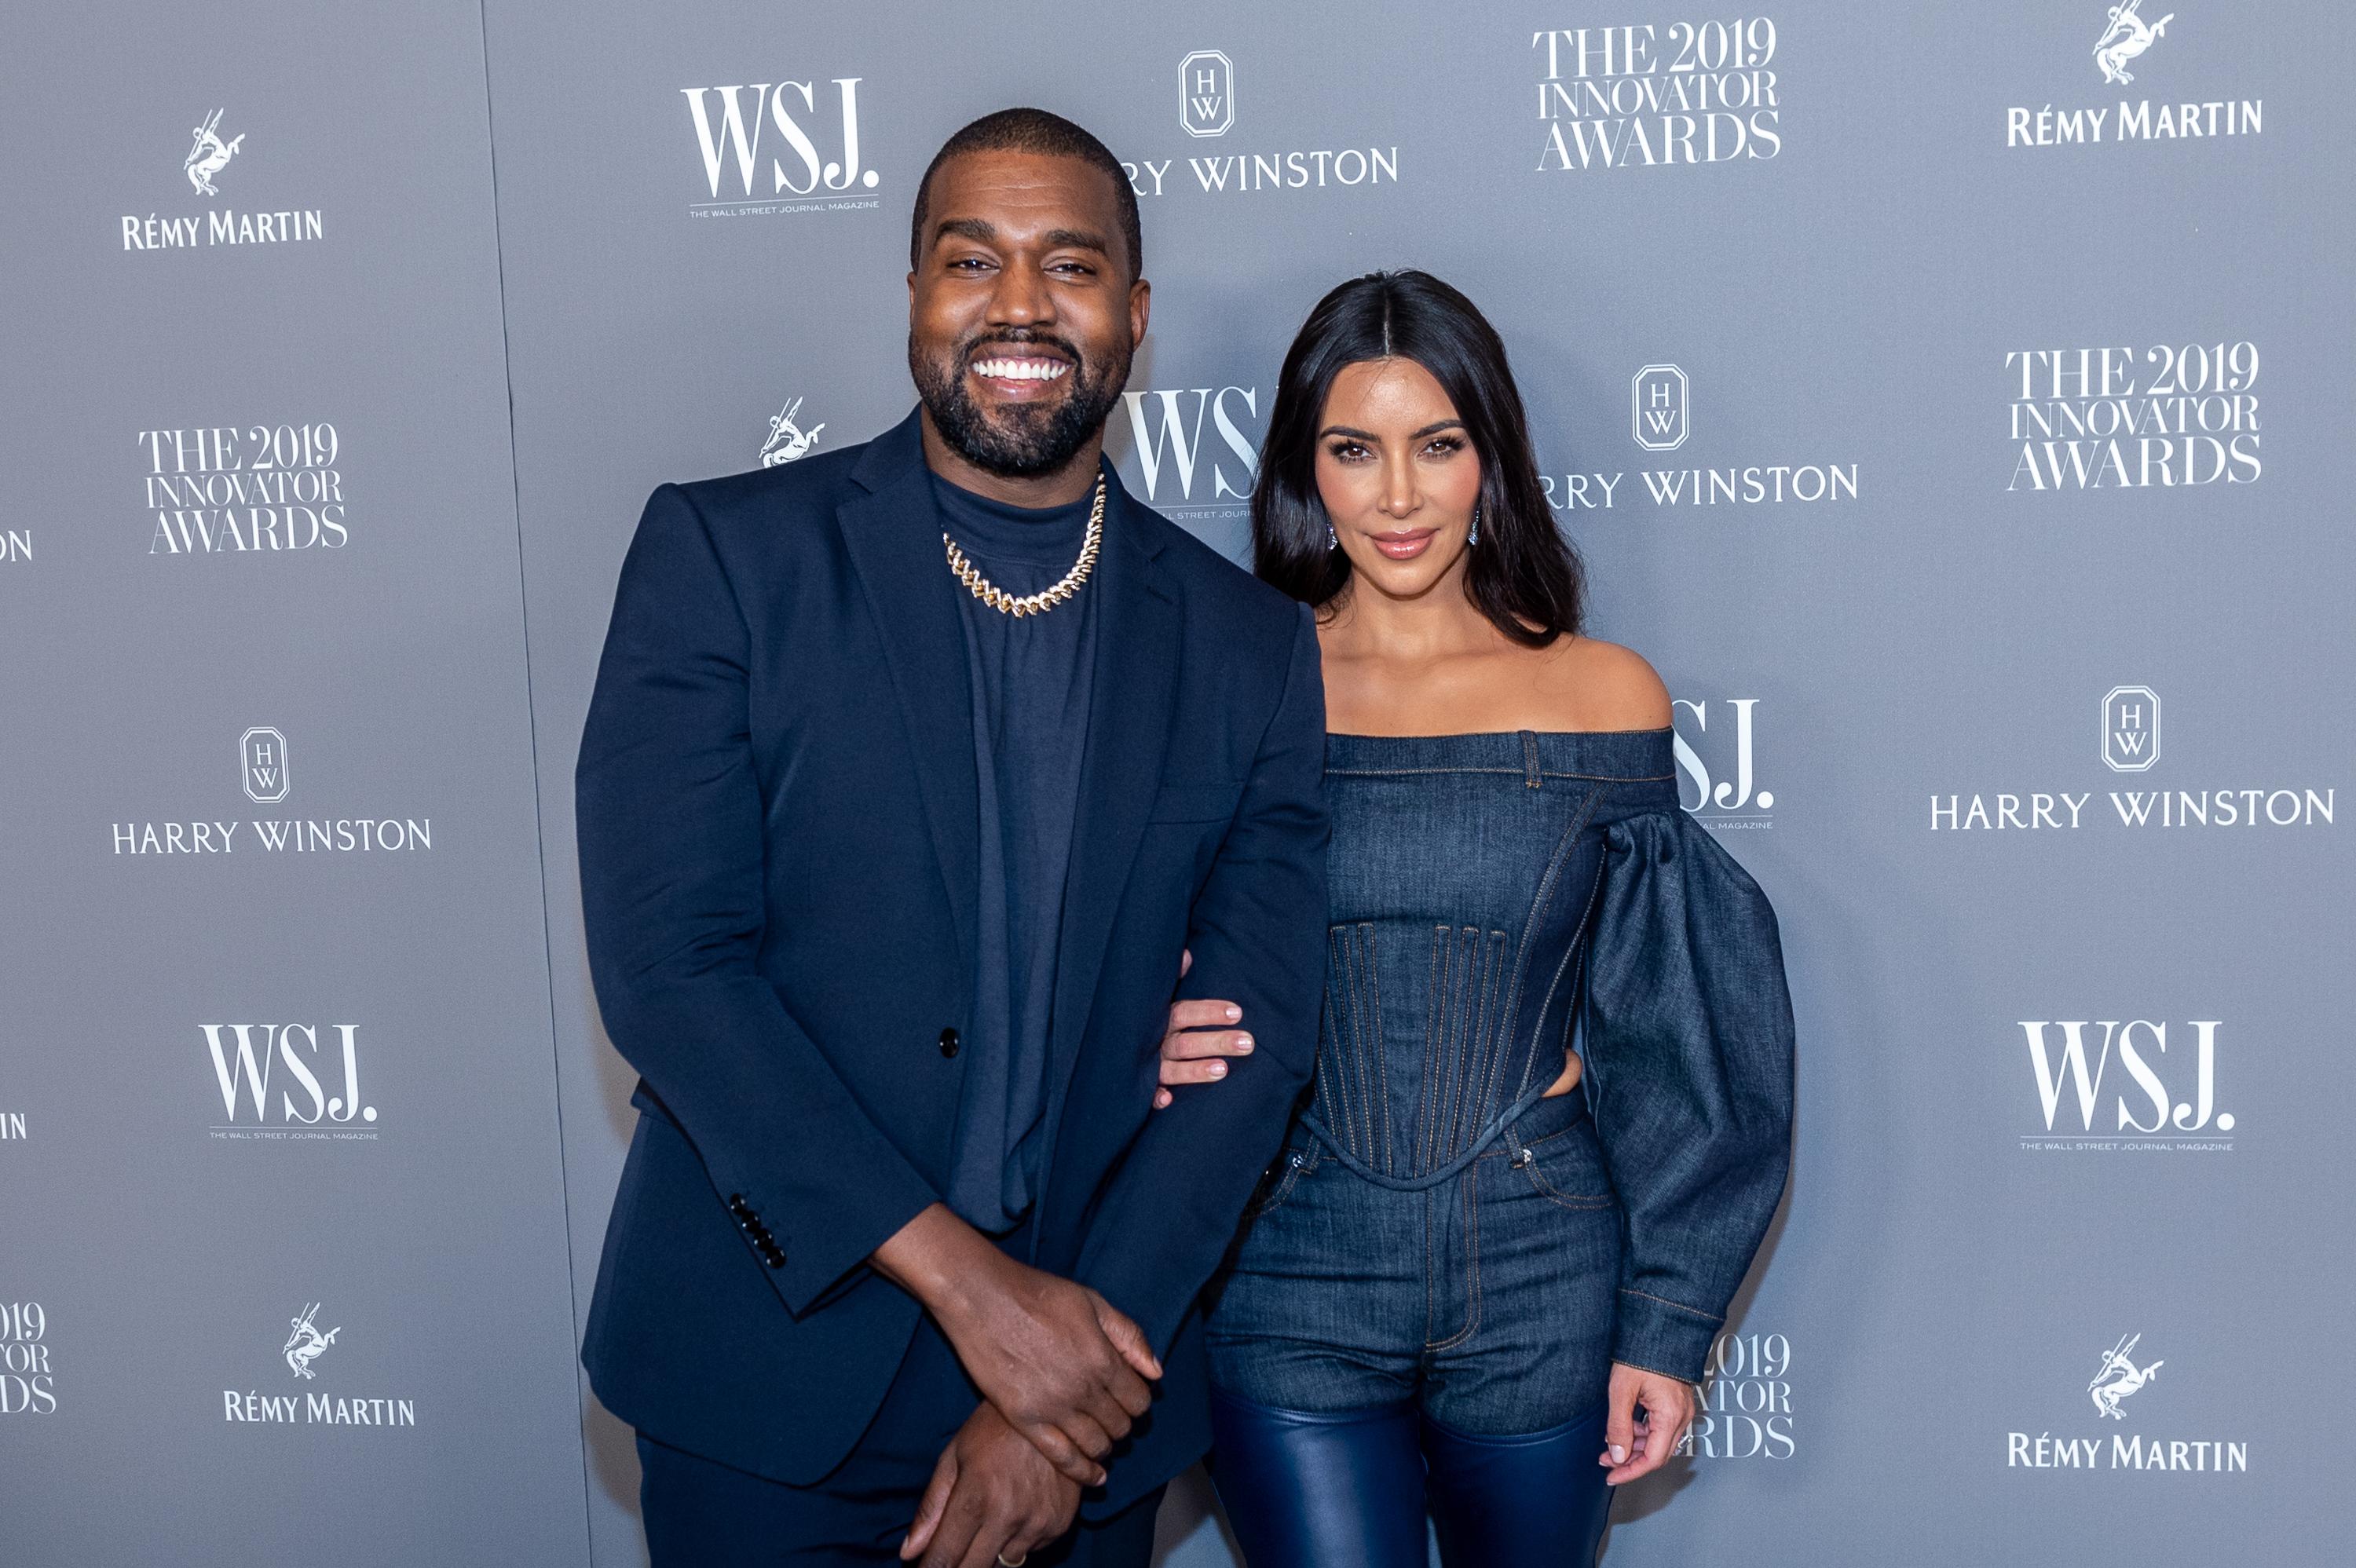 Kanye West Goes On A Twitter Rant About Kim Kardashian And Kris Jenner